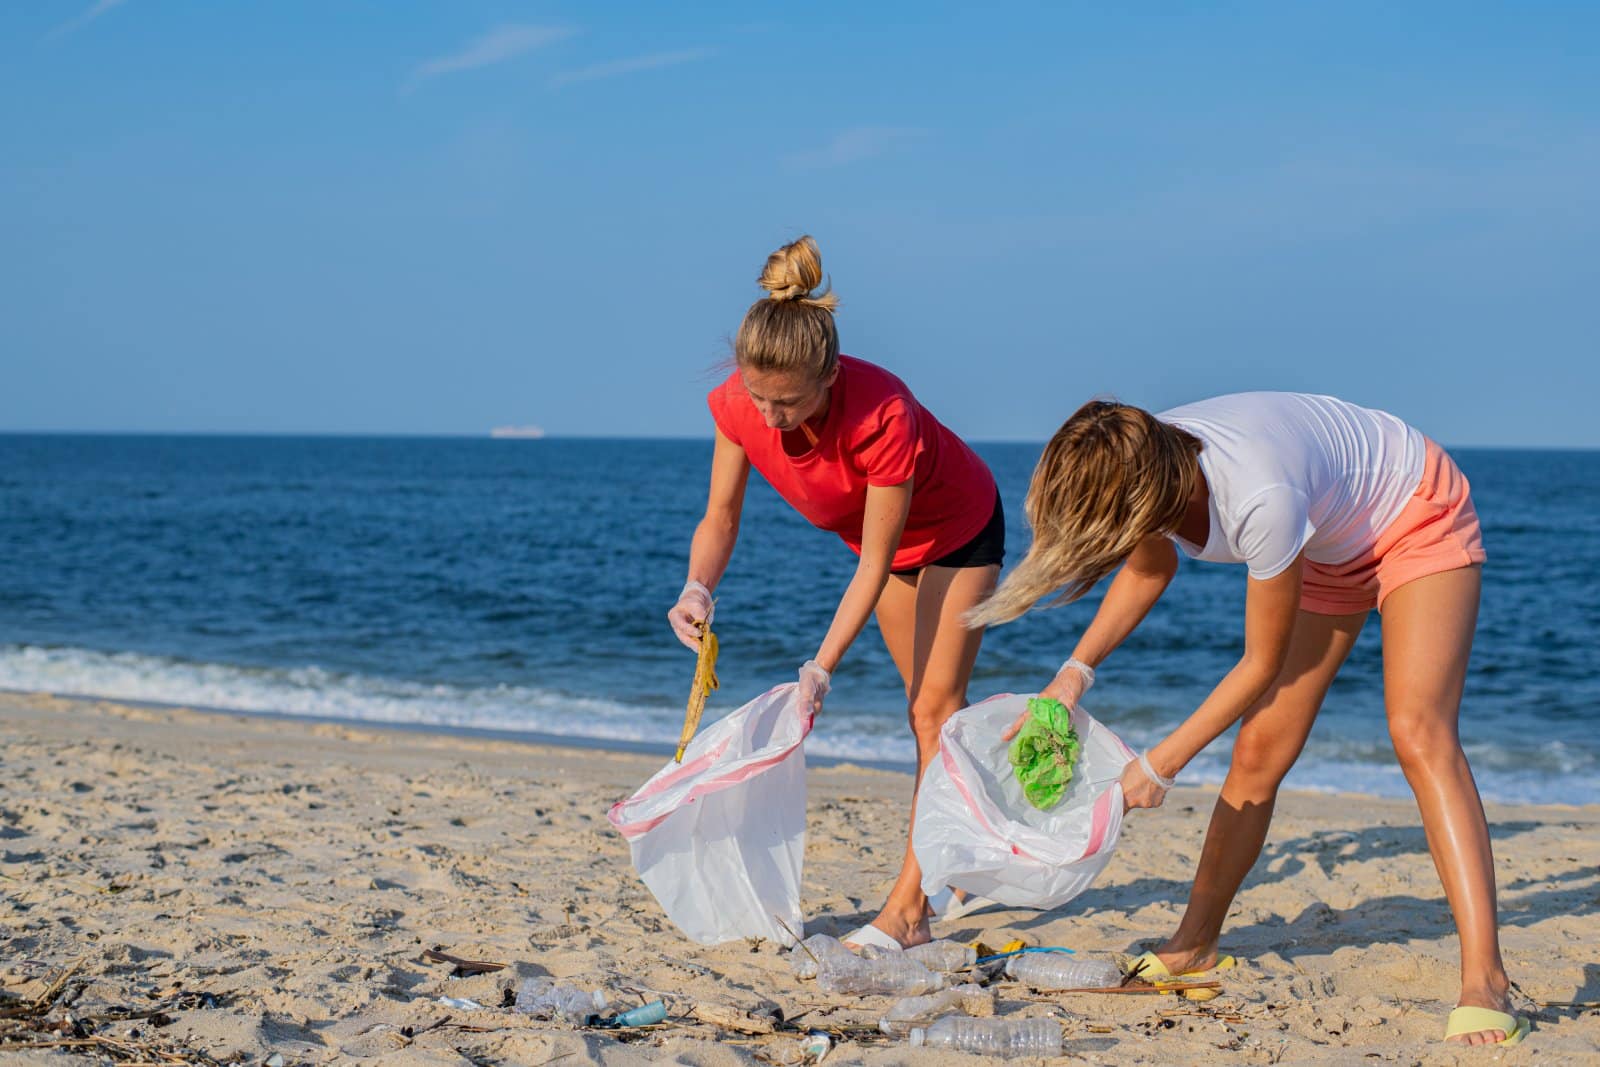 Image Credit: Shutterstock / Dmytro Flisak <p>Founder of The Ocean Cleanup at 18, Boyan Slat’s inventions are tackling the world’s ocean plastic crisis. His initiatives have removed tons of plastic from the ocean, proving that youth and a fresh perspective can lead to significant environmental impact.</p>